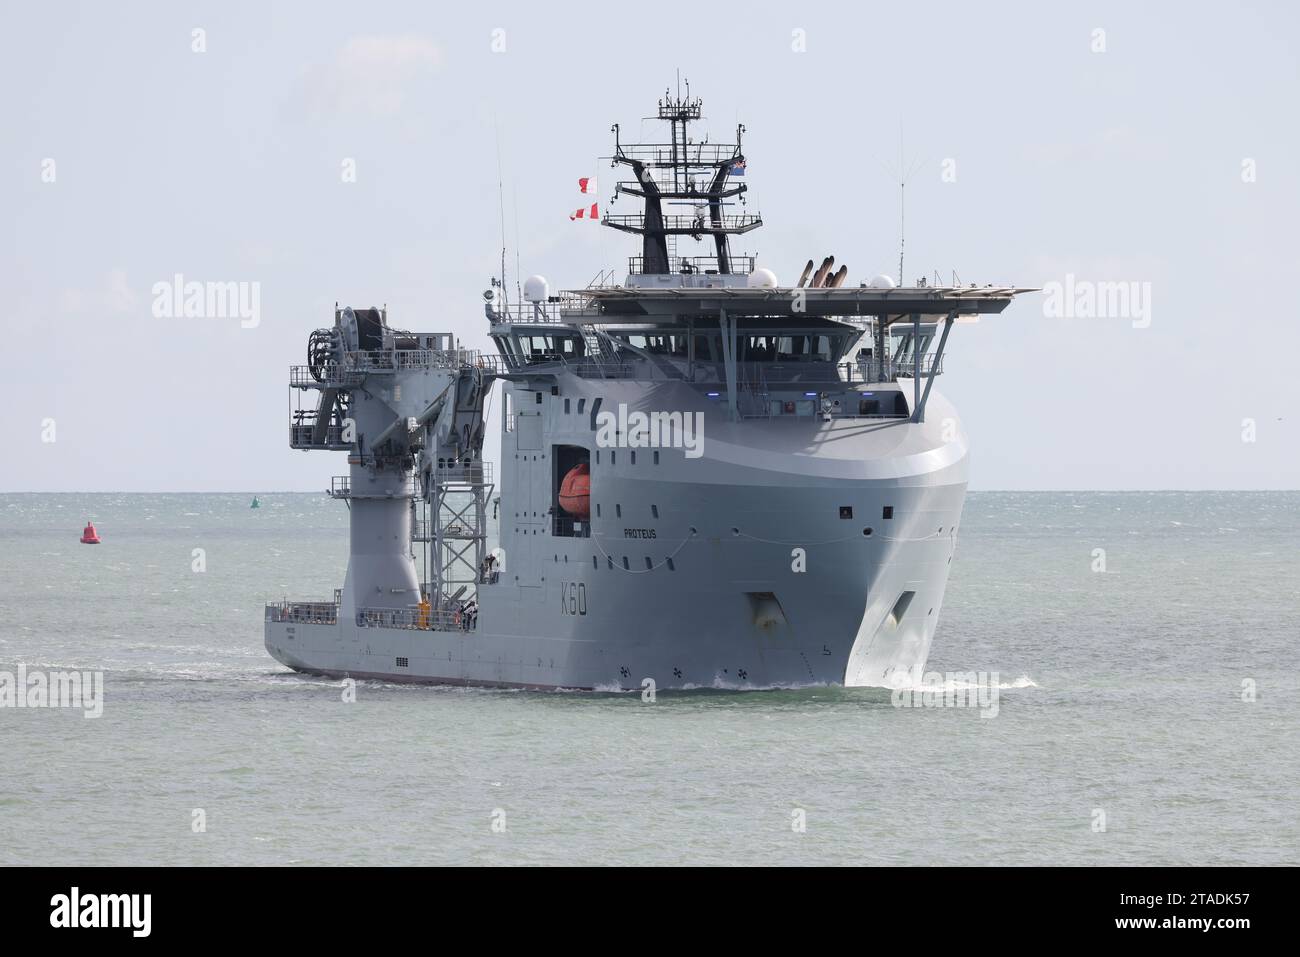 The British Royal Fleet Auxiliary’s latest ship RFA PROTEUS (K60) makes its first visit to the Naval Base Stock Photo